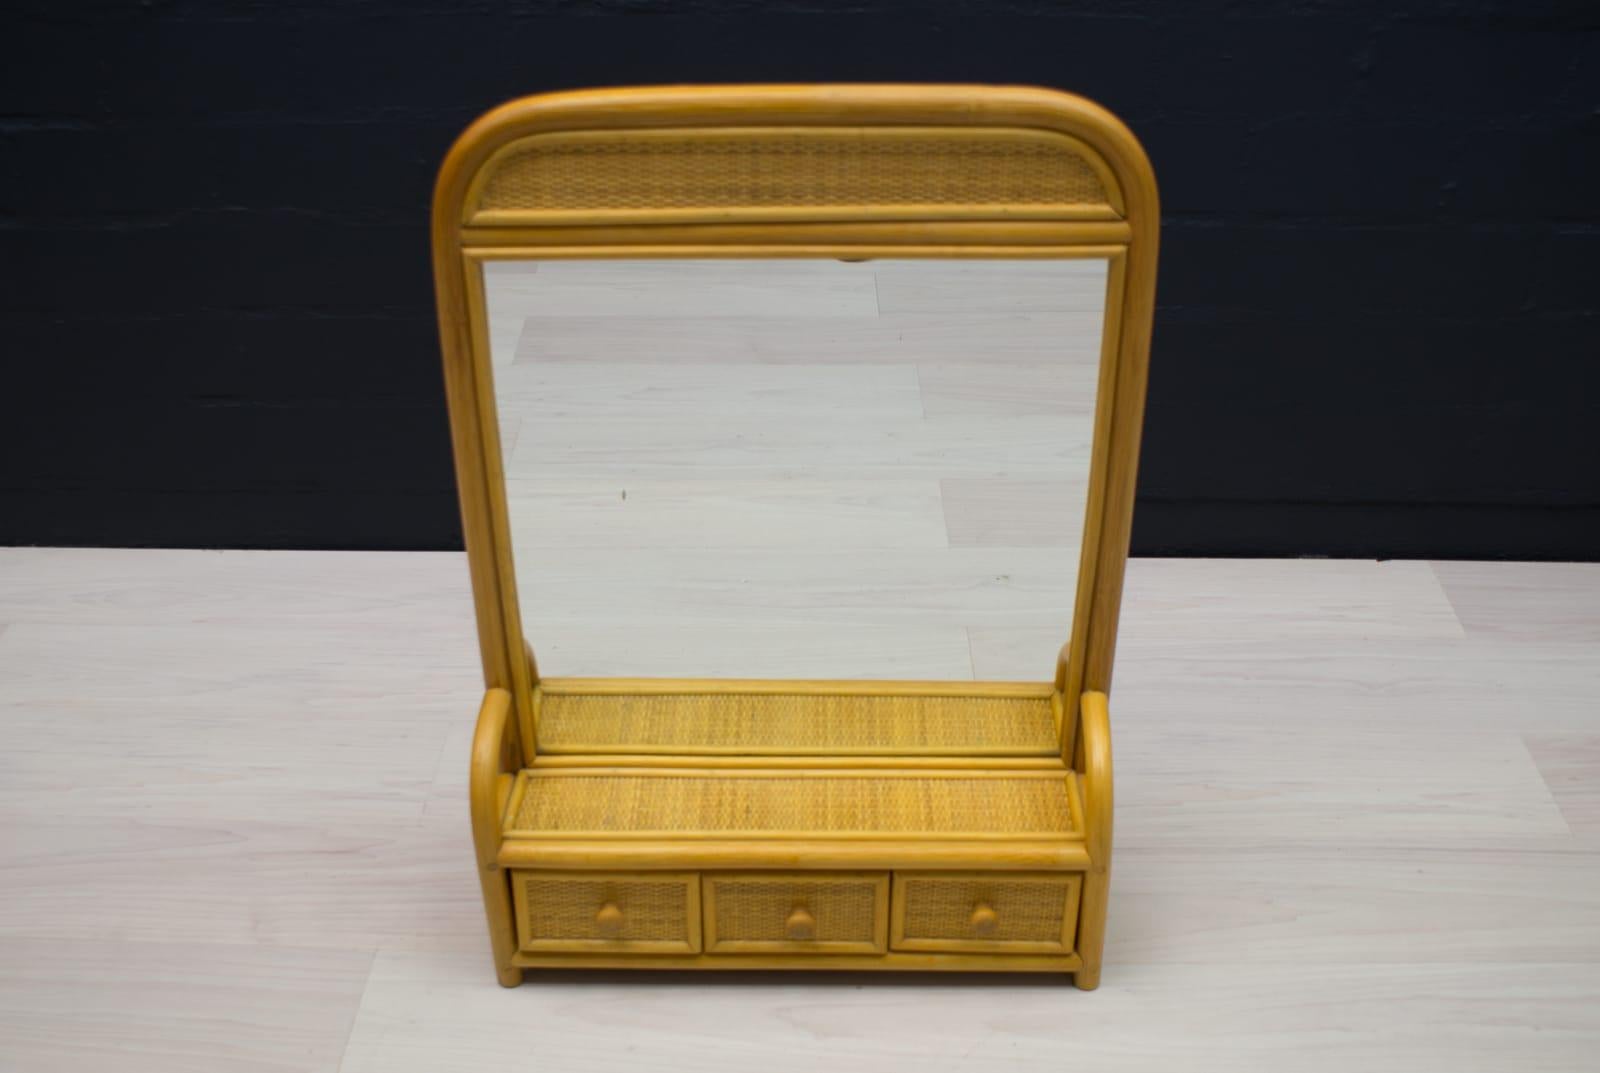 Bathroom bamboo and rattan wall mirror with three drawers, 1960s Italy

To hang or place on the wall. 